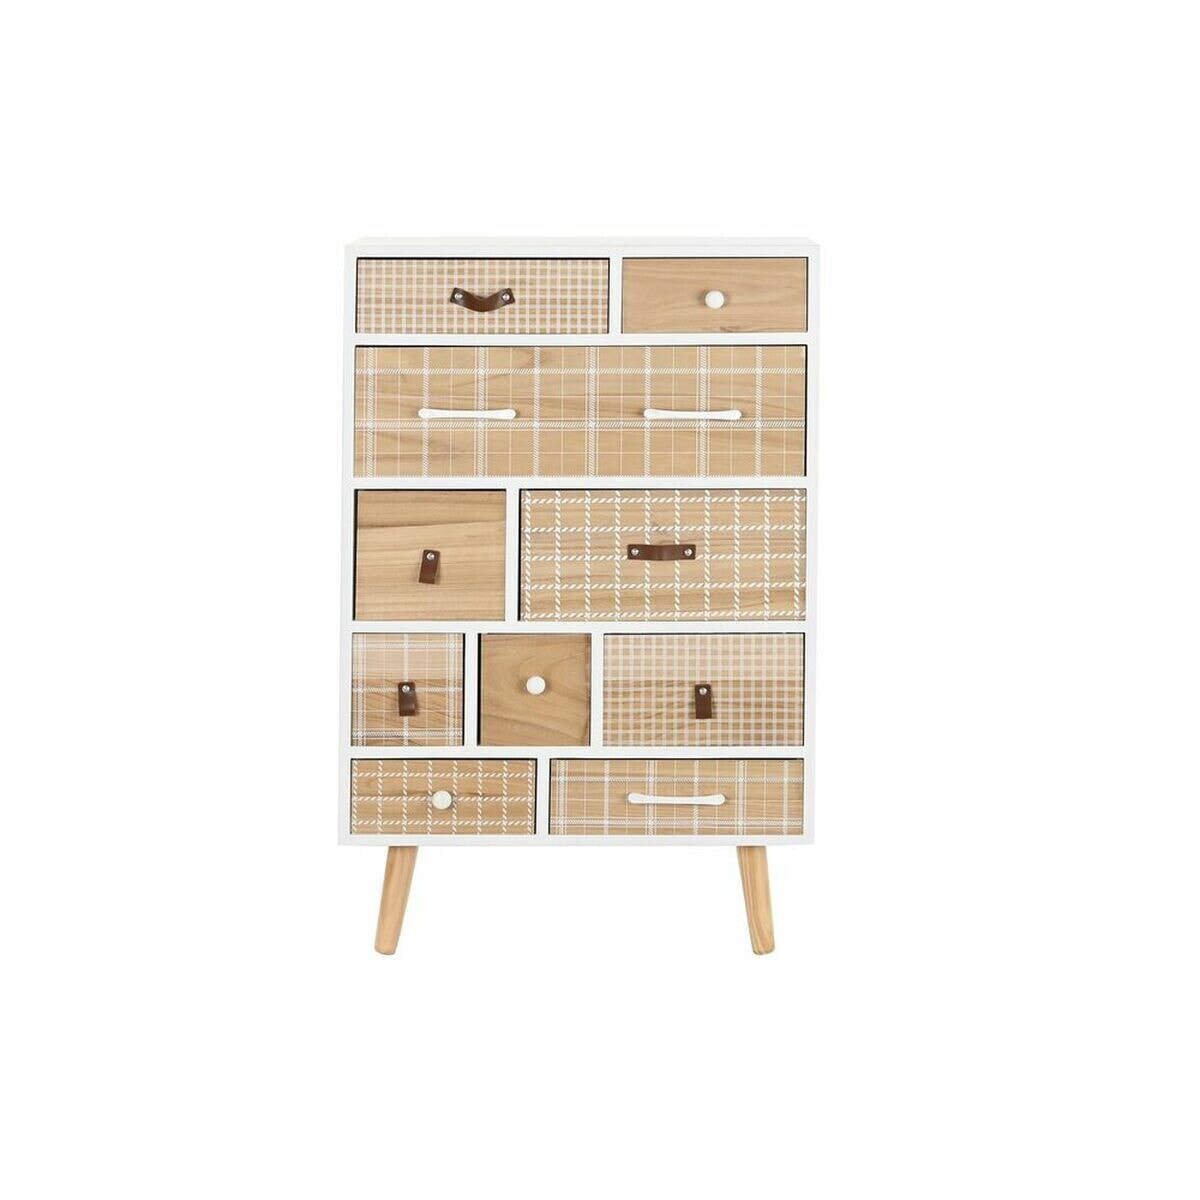 Chest of drawers DKD Home Decor White Natural Wood Paolownia wood 60 x 26 x 94 cm